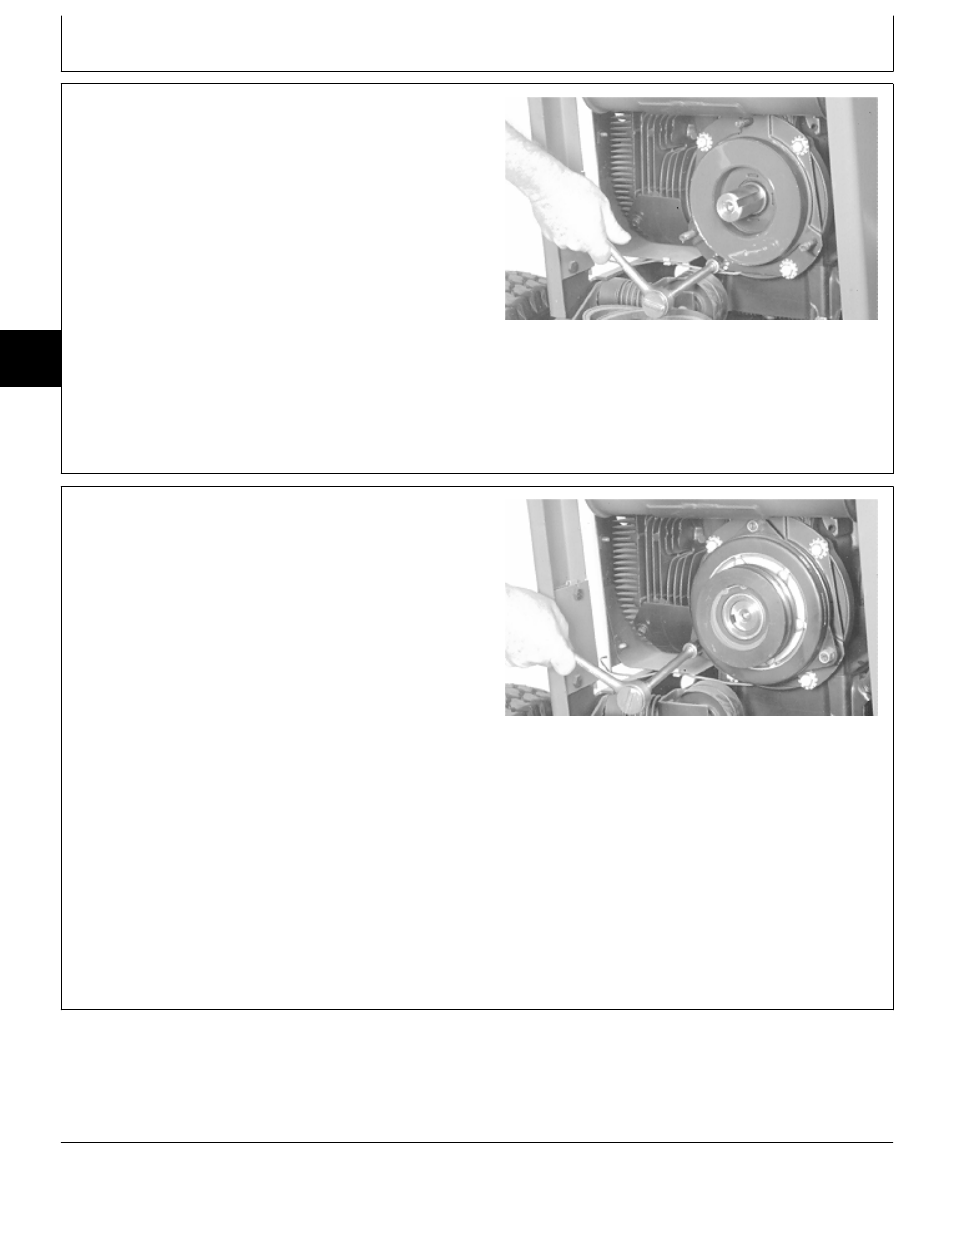 Install front pto clutch | John Deere 318 User Manual | Page 56 / 440